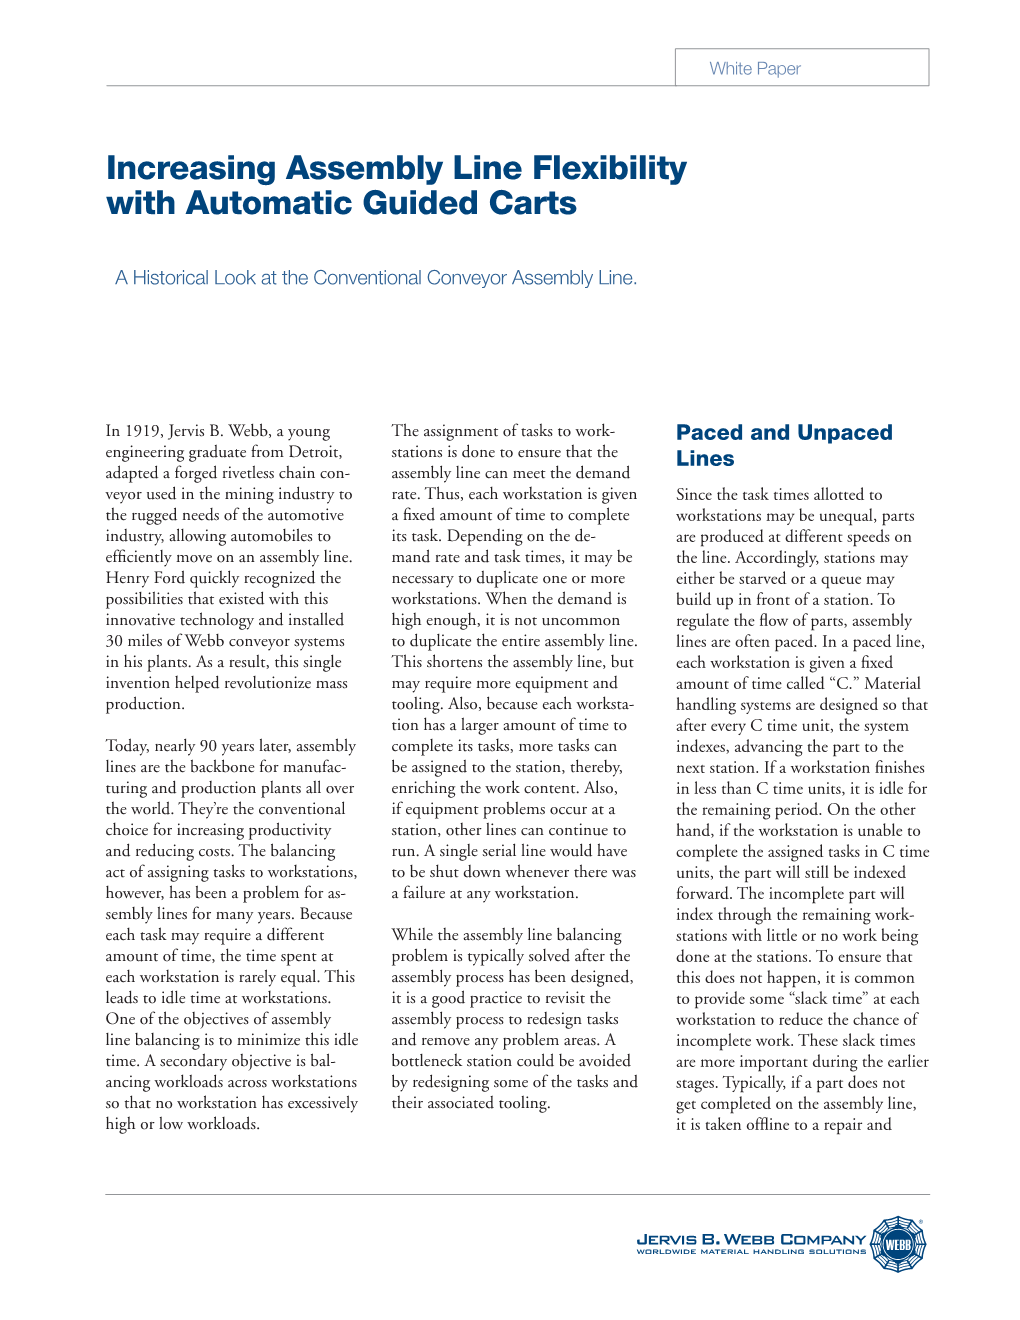 Increasing Assembly Line Flexibility with Automatic Guided Carts